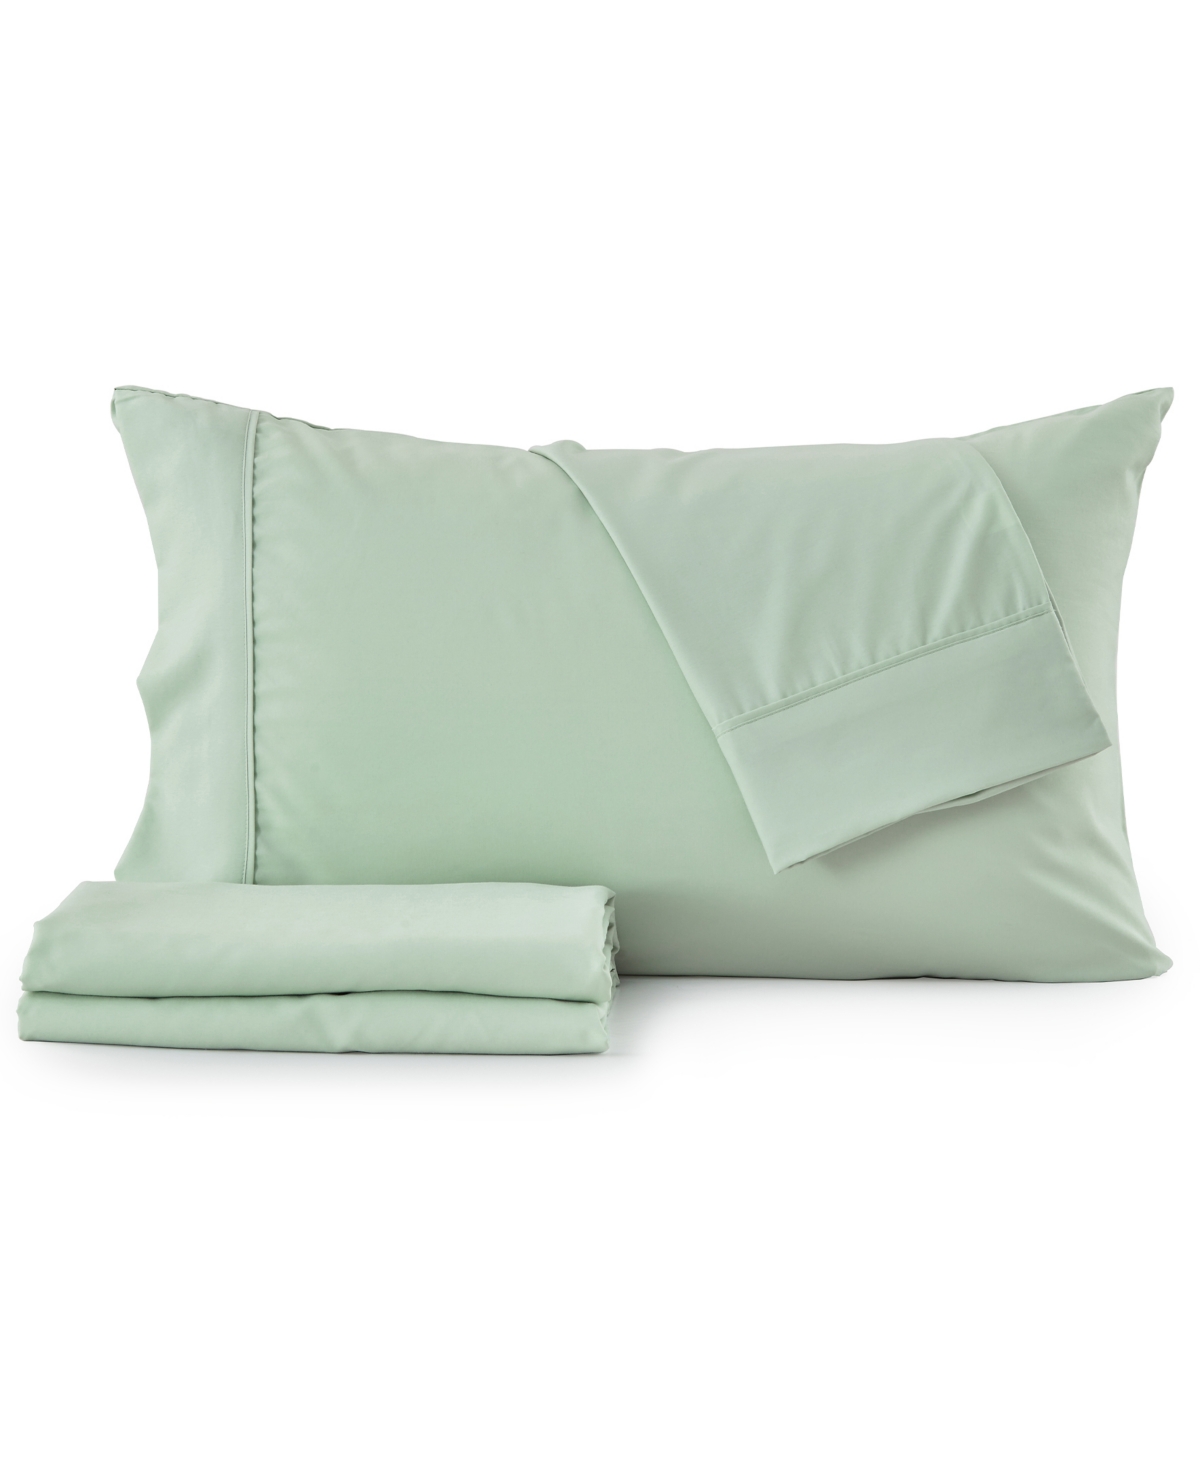 Premium Comforts Rayon From Bamboo Blend Crease-resistant 4 Piece Sheet Set, King In Sage